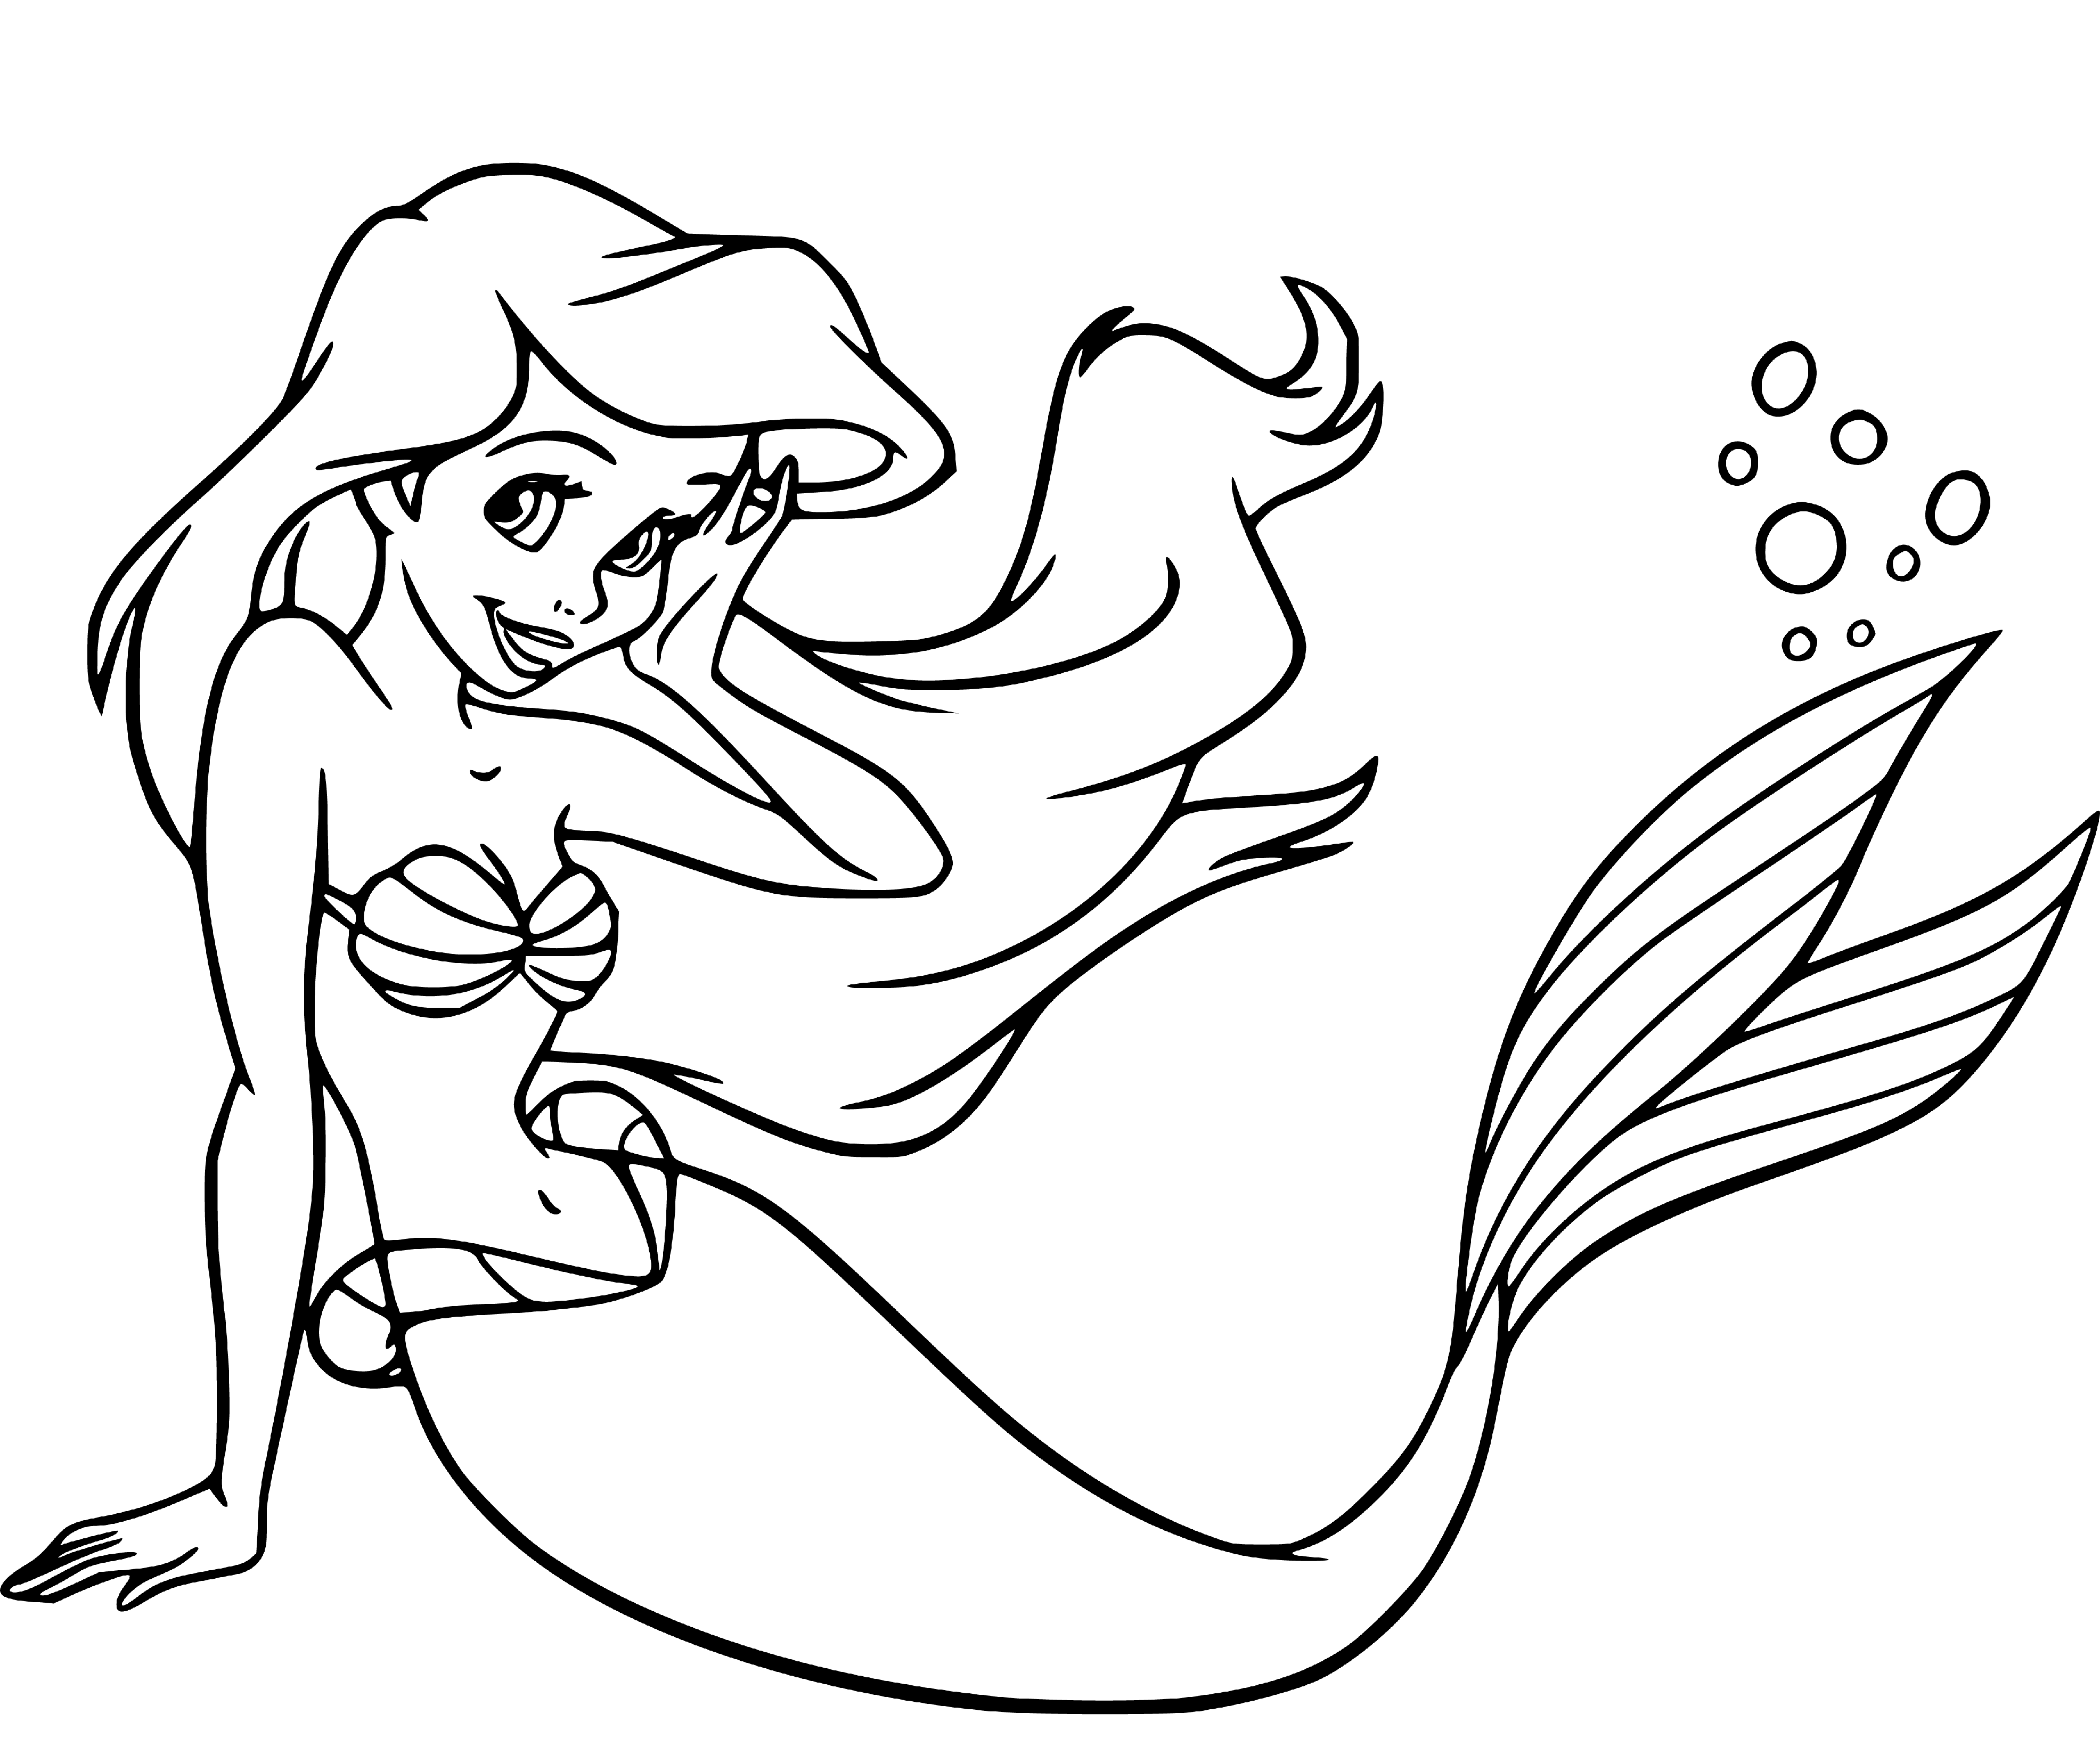 Shy Little Mermaid Coloring Page for Kids - SheetalColor.com